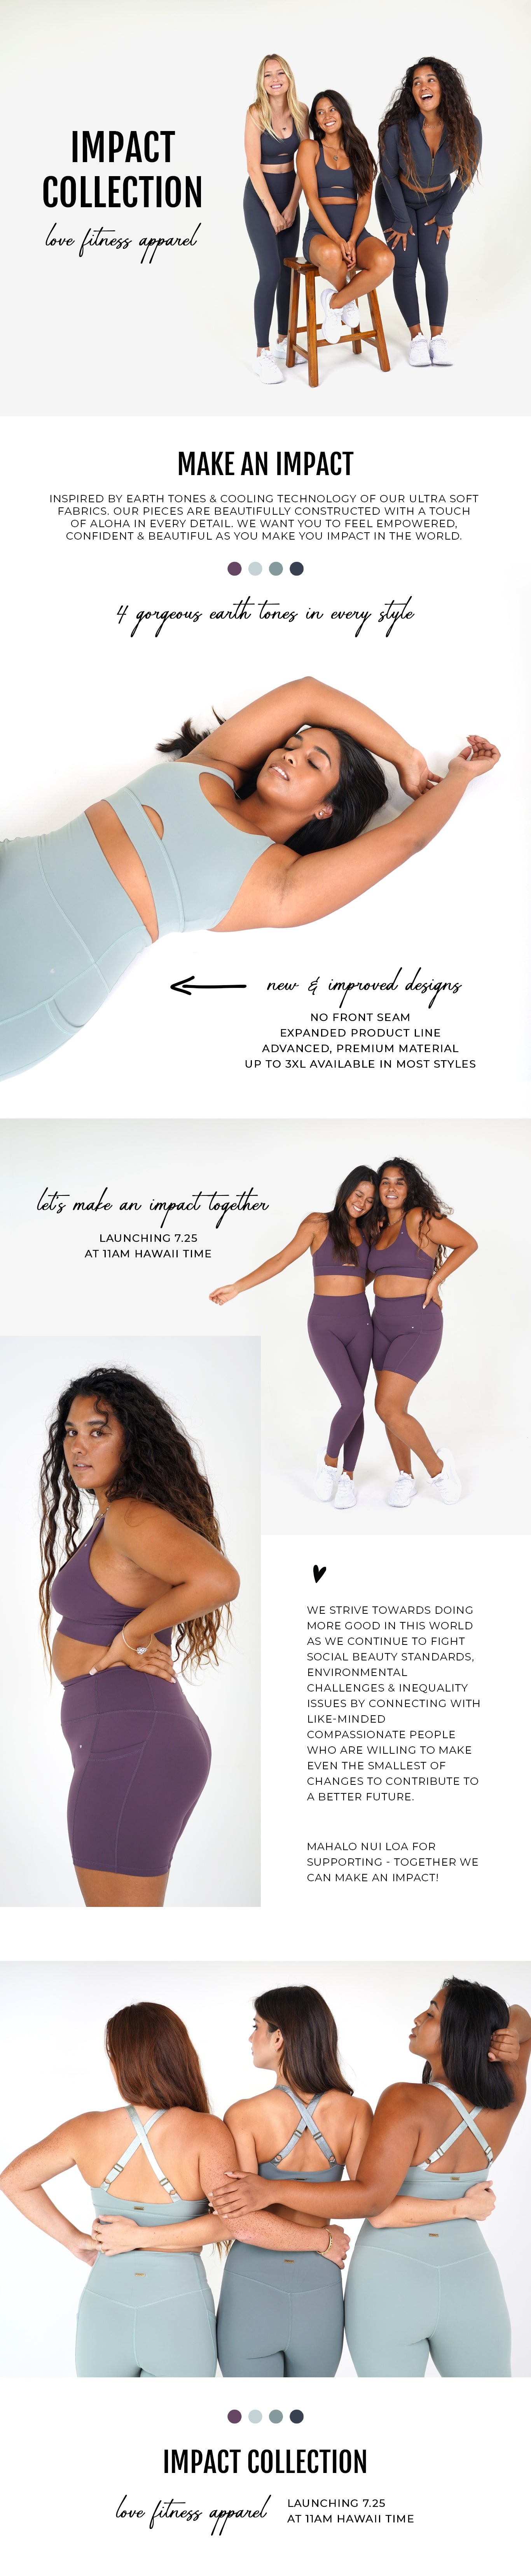 Impact Collection Restocking/Launching with all new styles on July 25th @ 11am HST.  Introducing Love Fitness Impact Collection. Inspired by earth tones & cooling technology of our ultra soft fabrics. Our pieces are beautifully constructed with a touch of aloha in every detail. We want you to feel empowered, confident & beautiful as you make you impact in the world.   We strive towards doing more good in this world as we continue to fight social beauty standards, environmental challenges & inequality issues by connecting with like-minded compassionate people who are willing to make even the smallest of changes to contribute to a better future.   Mahalo nui loa for supporting - together we can make an impact!